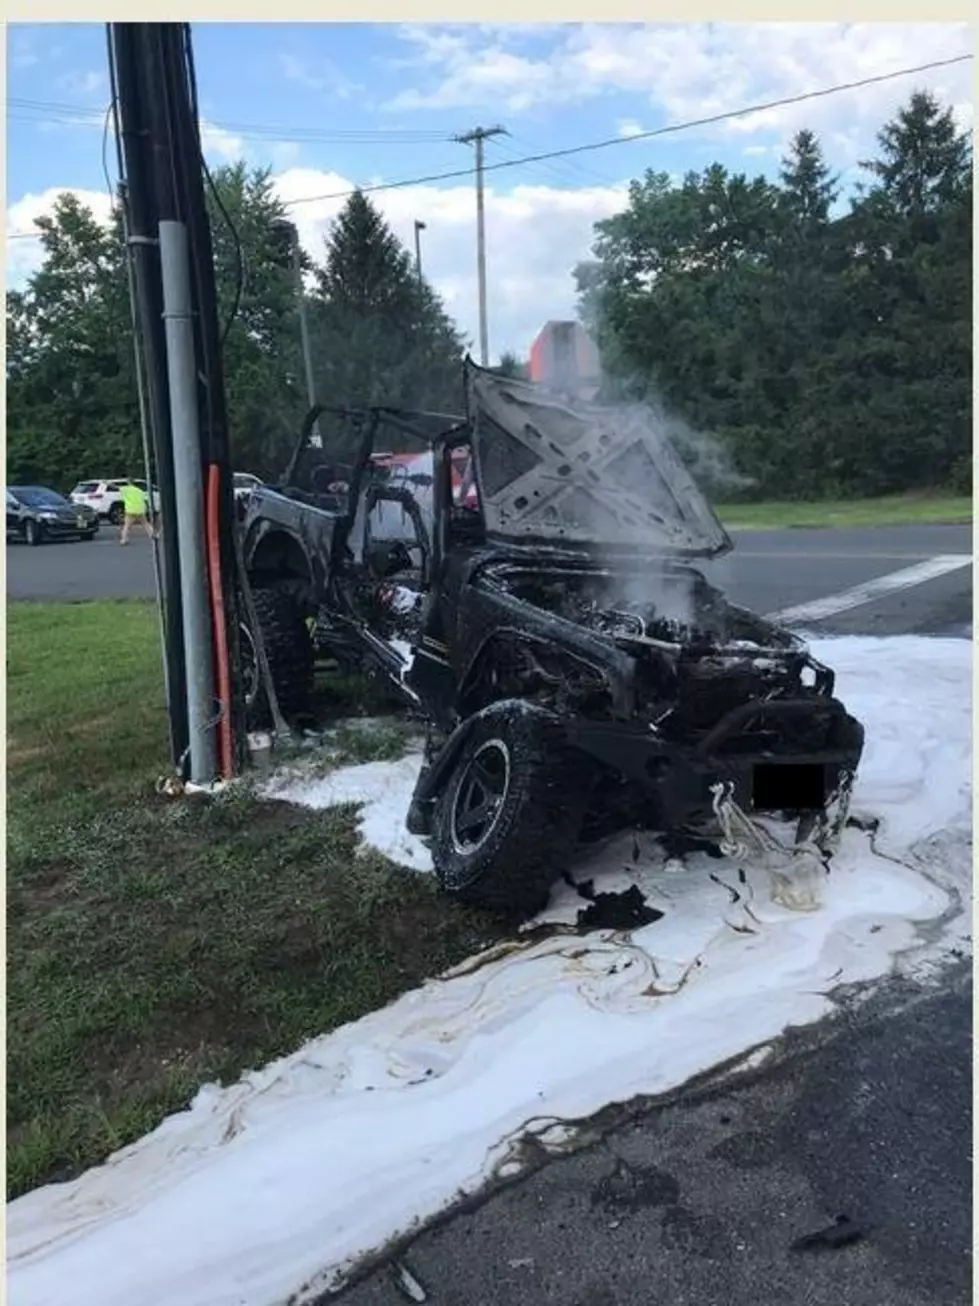 Driver And Passenger Escape Jeep That Catches Fire In Car Accident